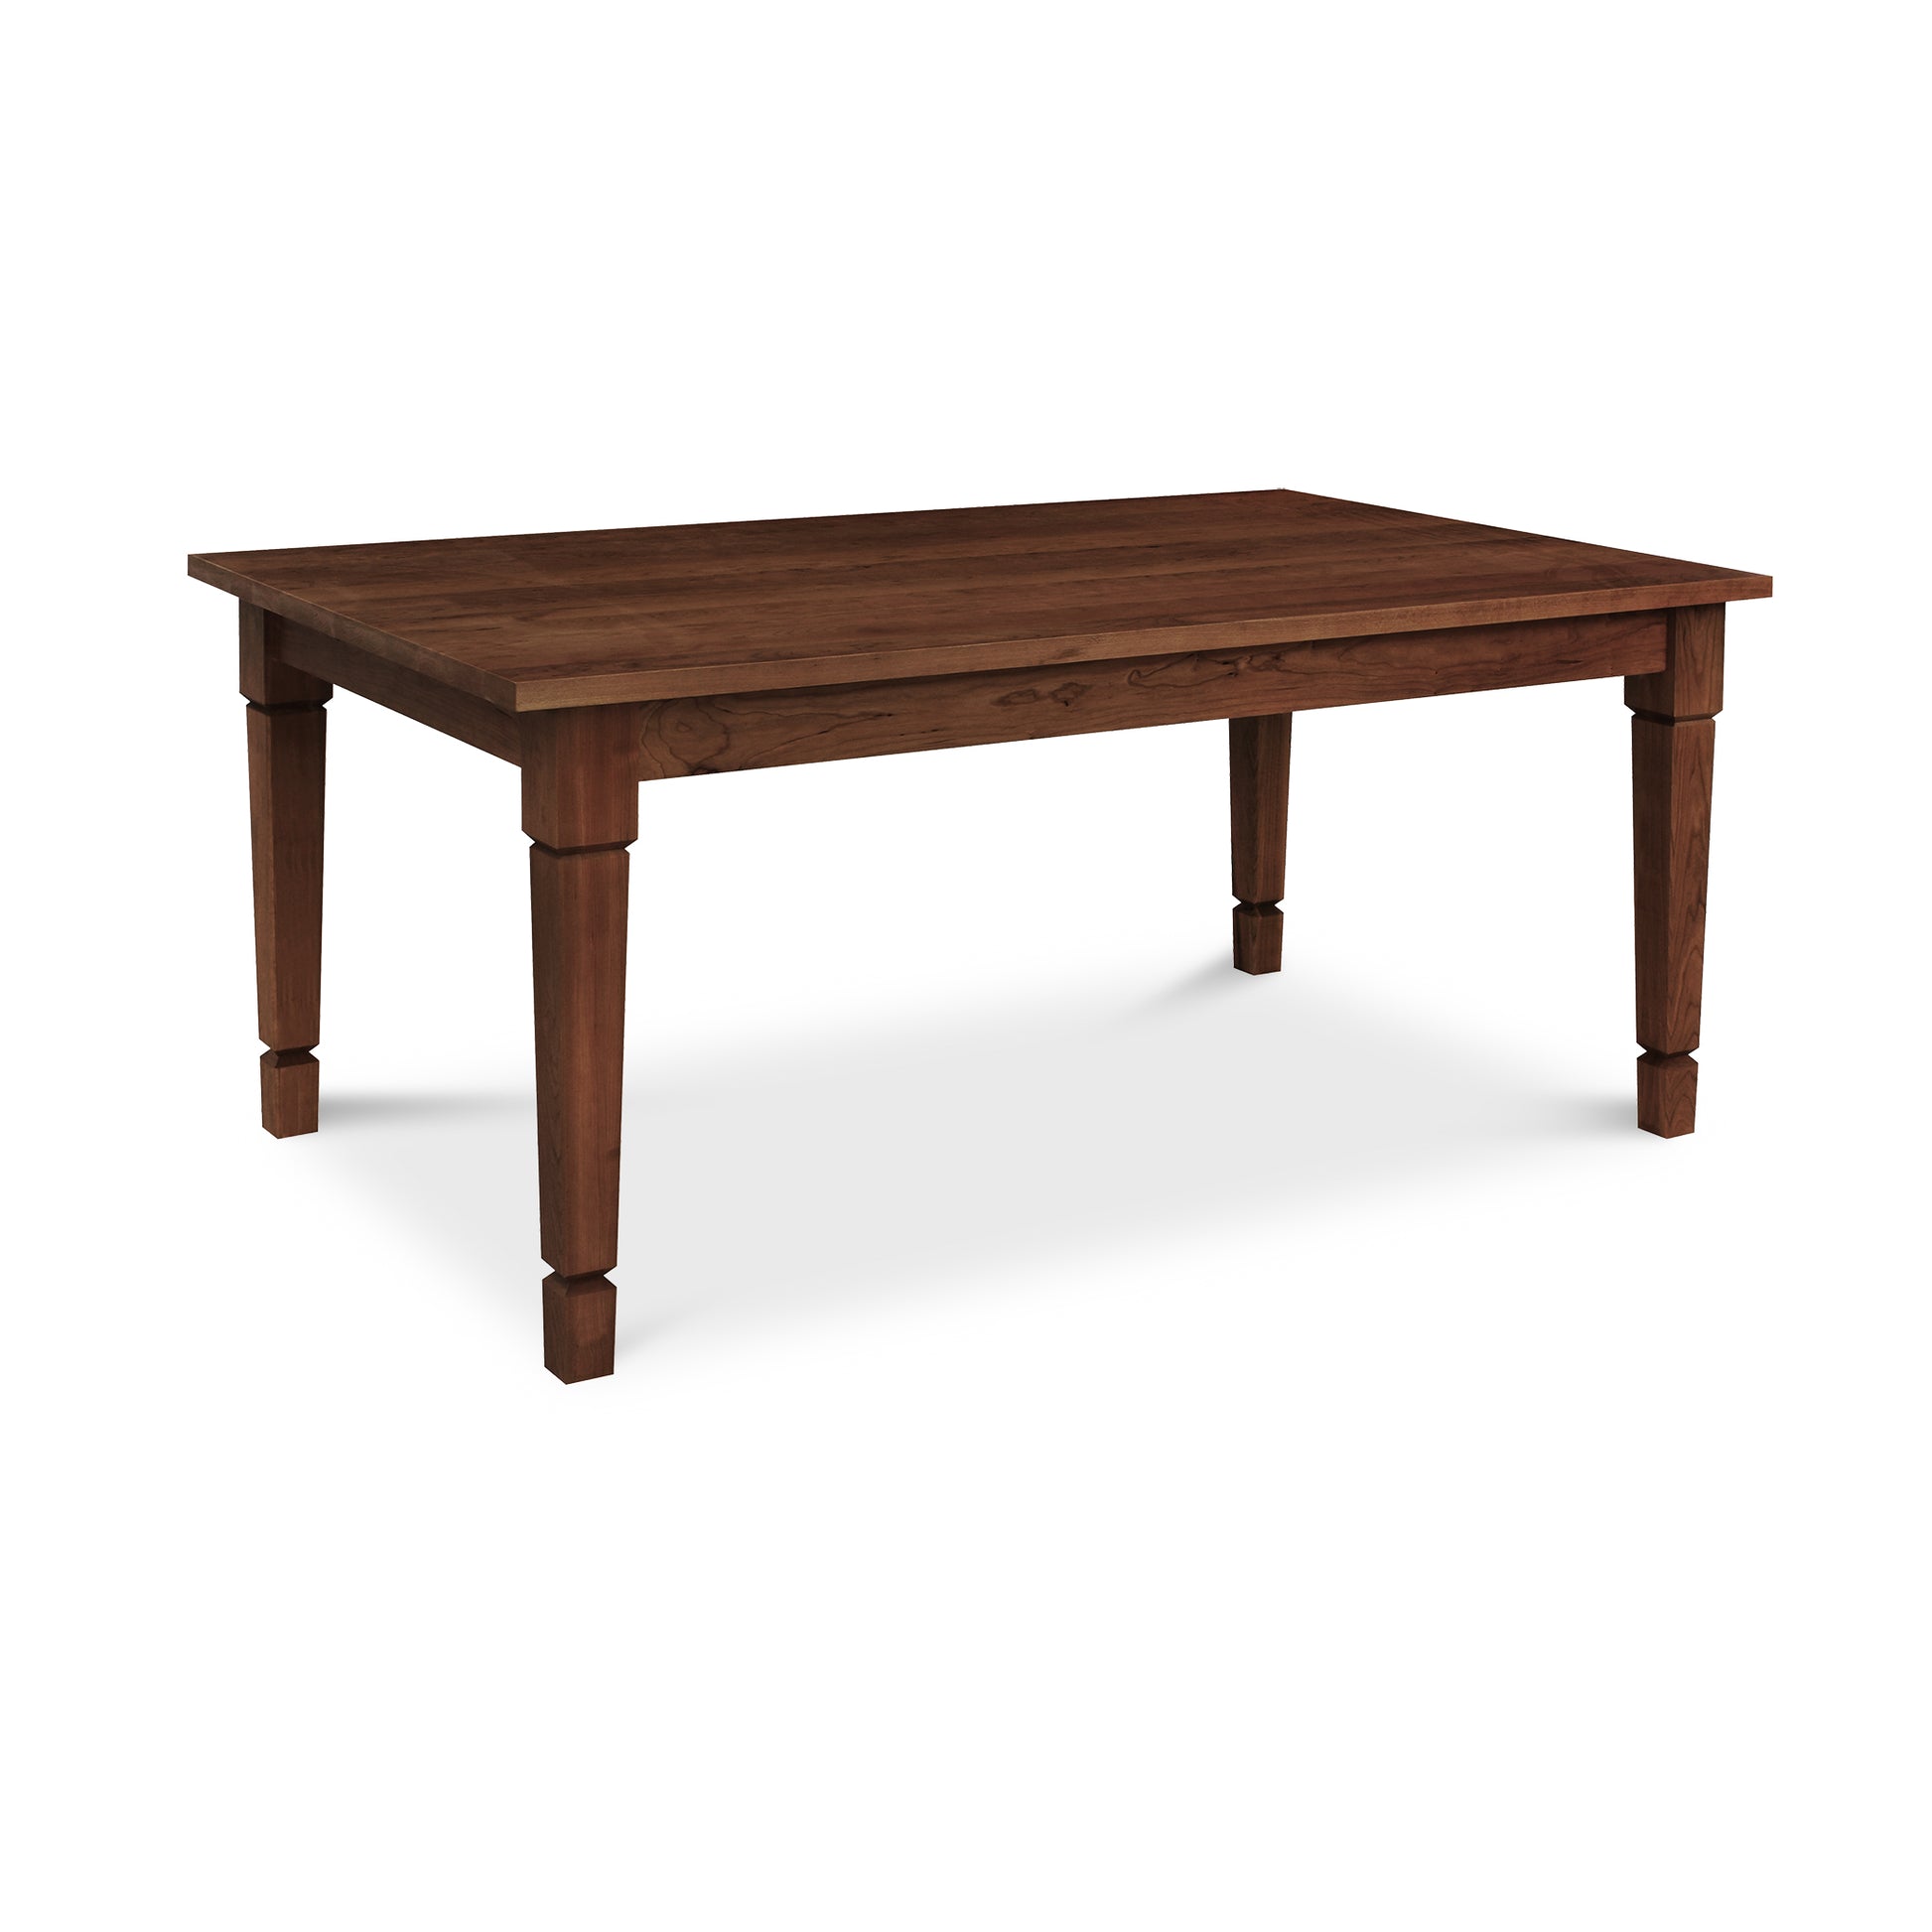 A Lyndon Furniture American Craftsman Solid Top Dining Table with a simple design and four sturdy legs, isolated on a white background.